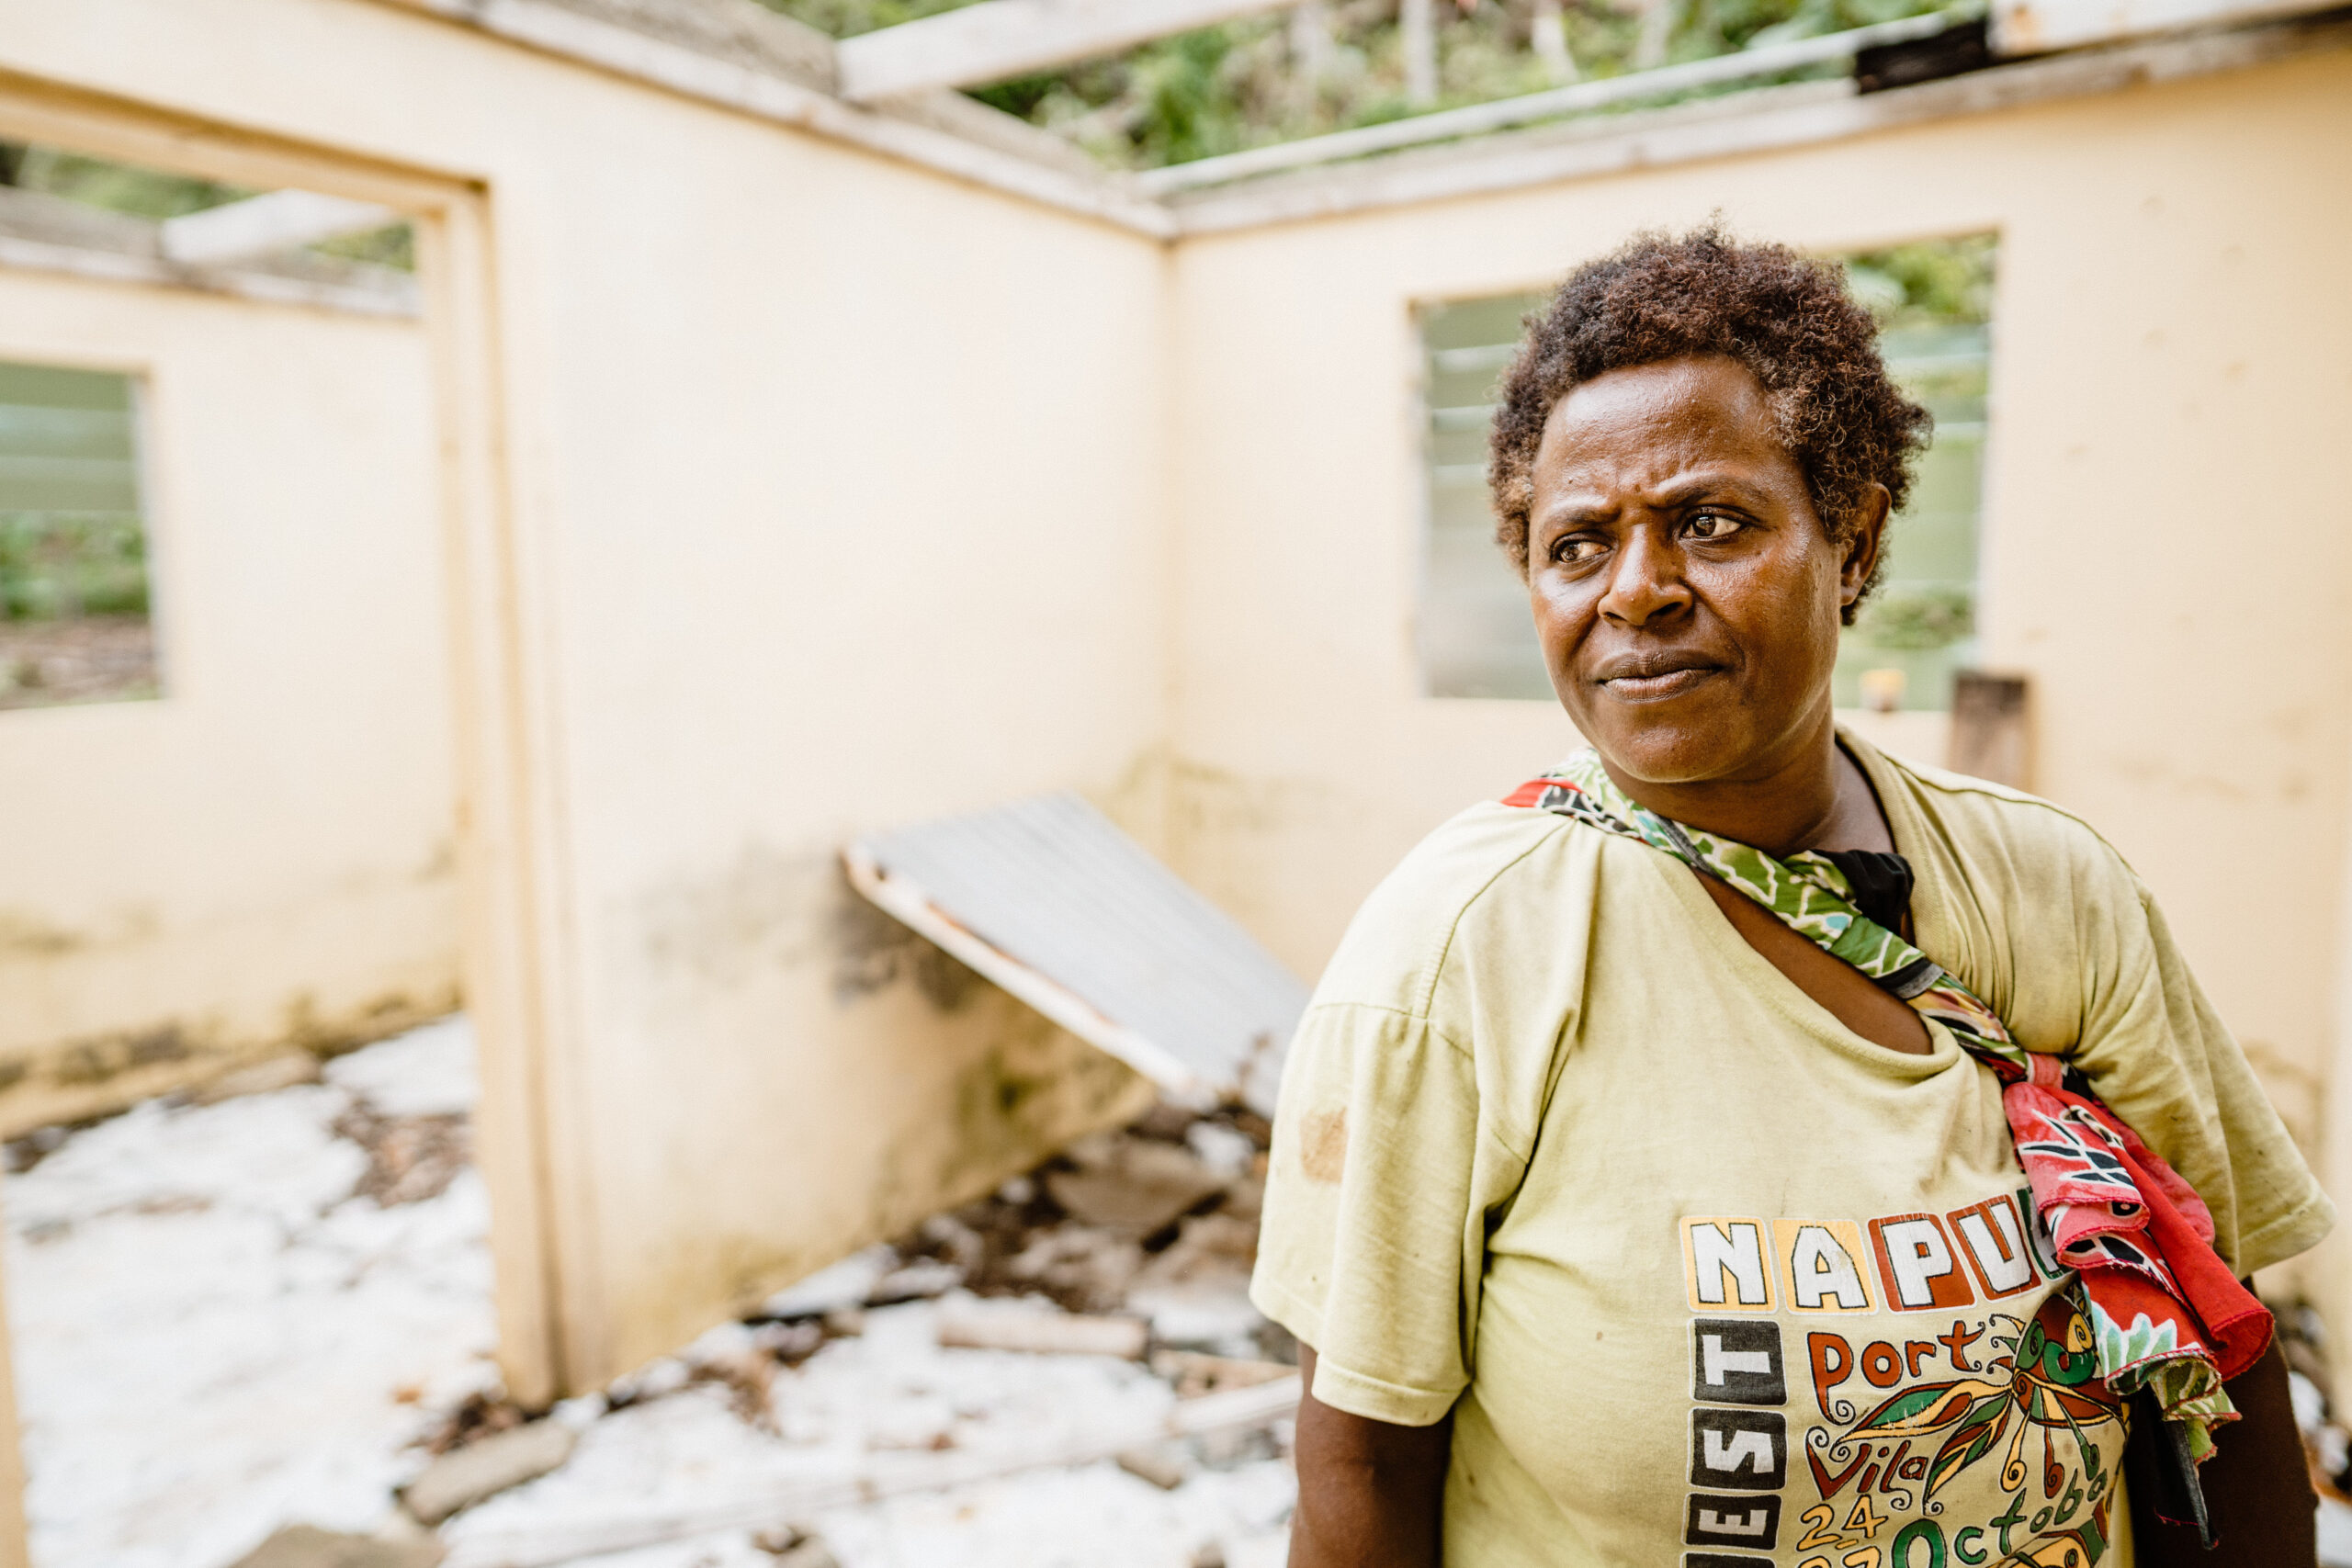 Angela lost her home and belongings to Tropical Cyclone Harold. Photo courtesy of CARE.